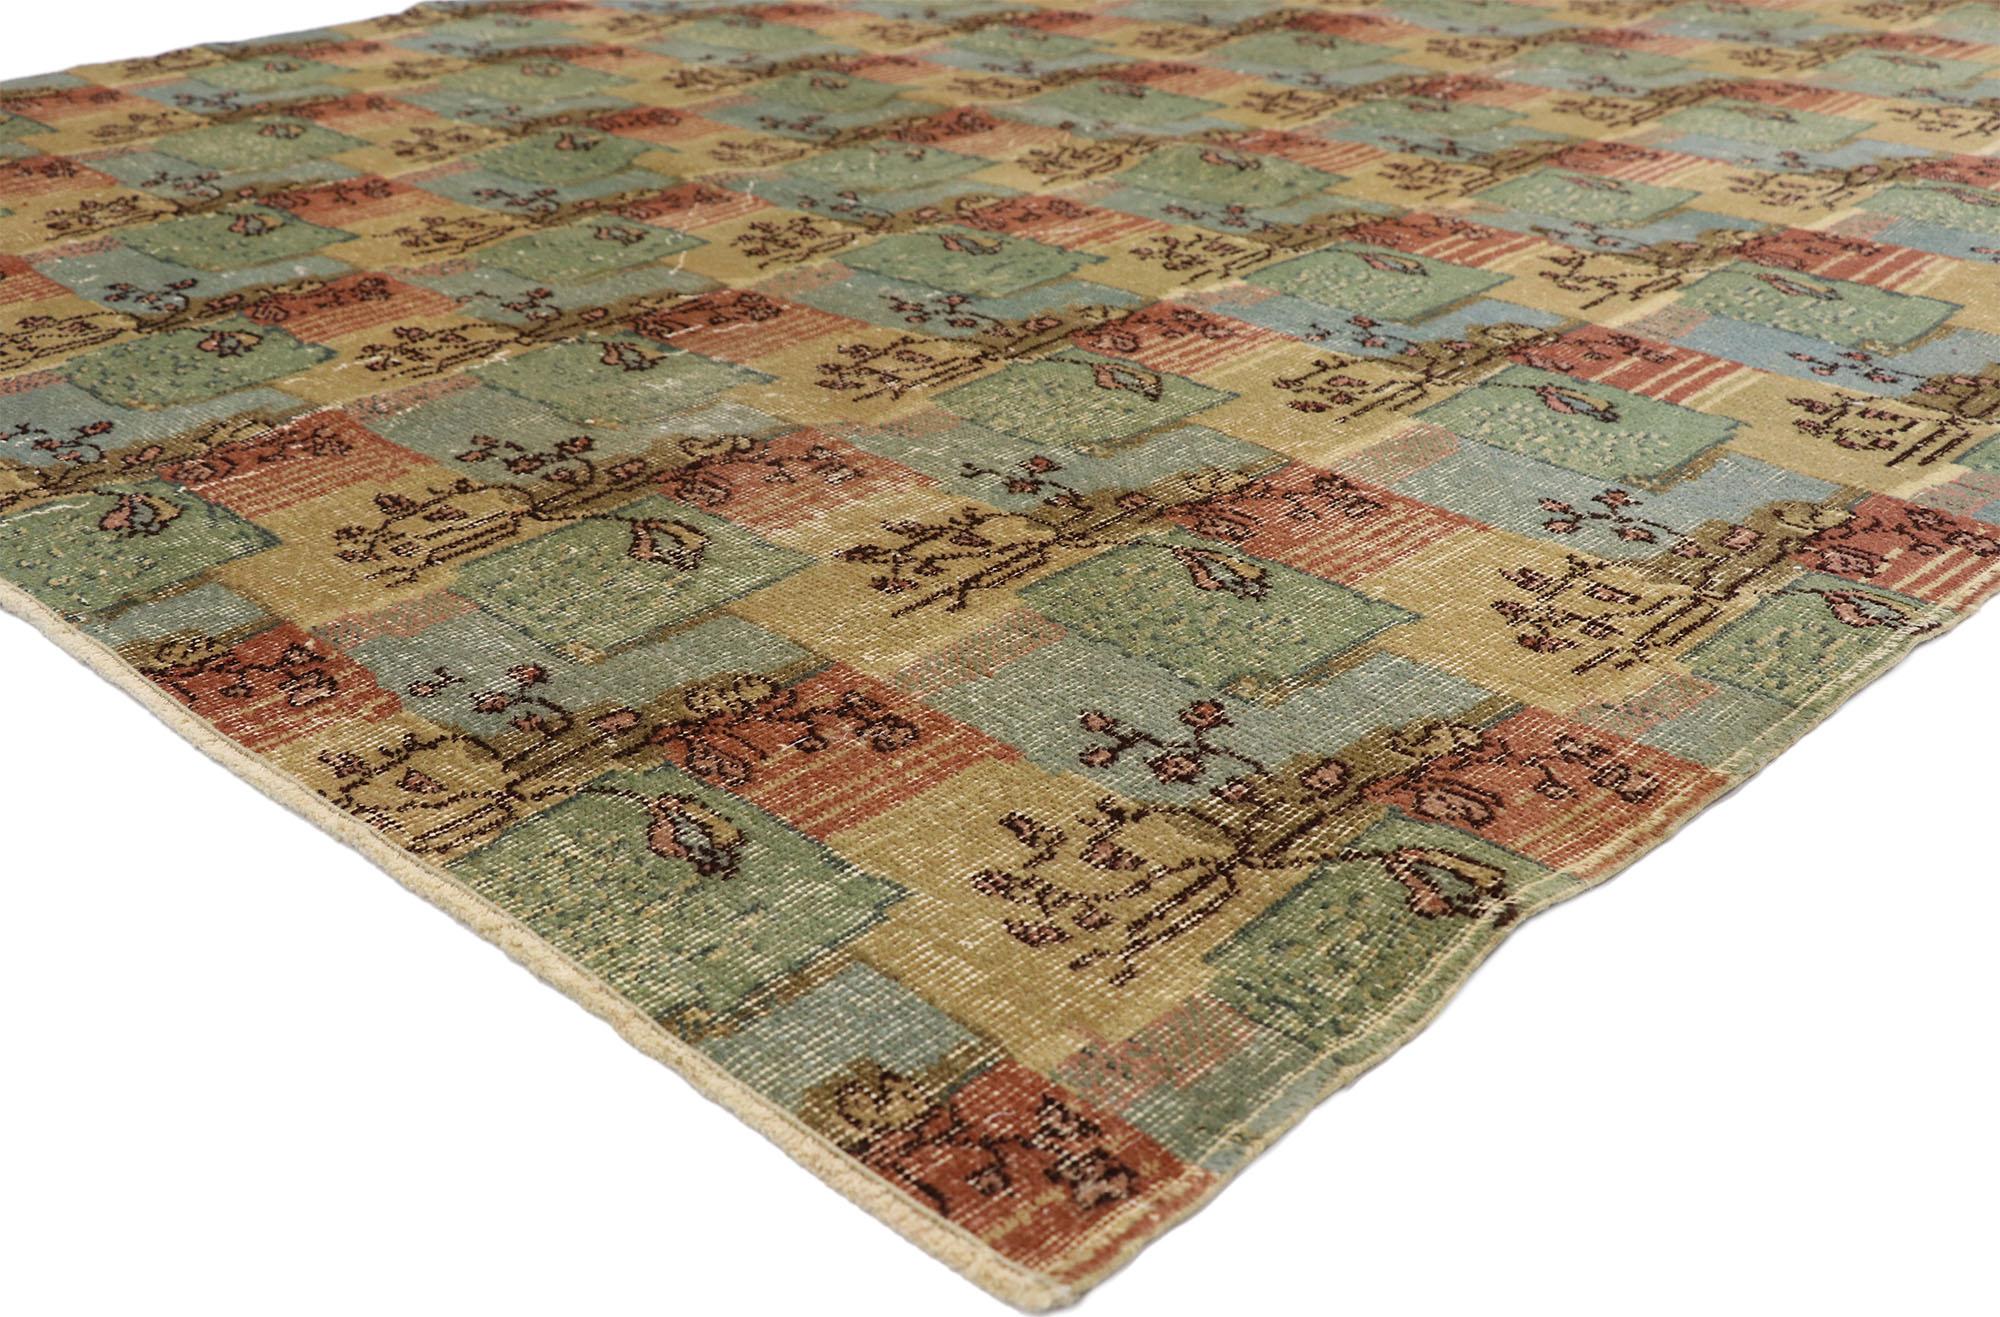 52574 Zeki Muren distressed vintage Turkish Sivas rug with shabby chic cottage style. This hand knotted wool distressed vintage Turkish Sivas rug features an all-over patchwork pattern spread across an abrashed field. The geometric pattern is